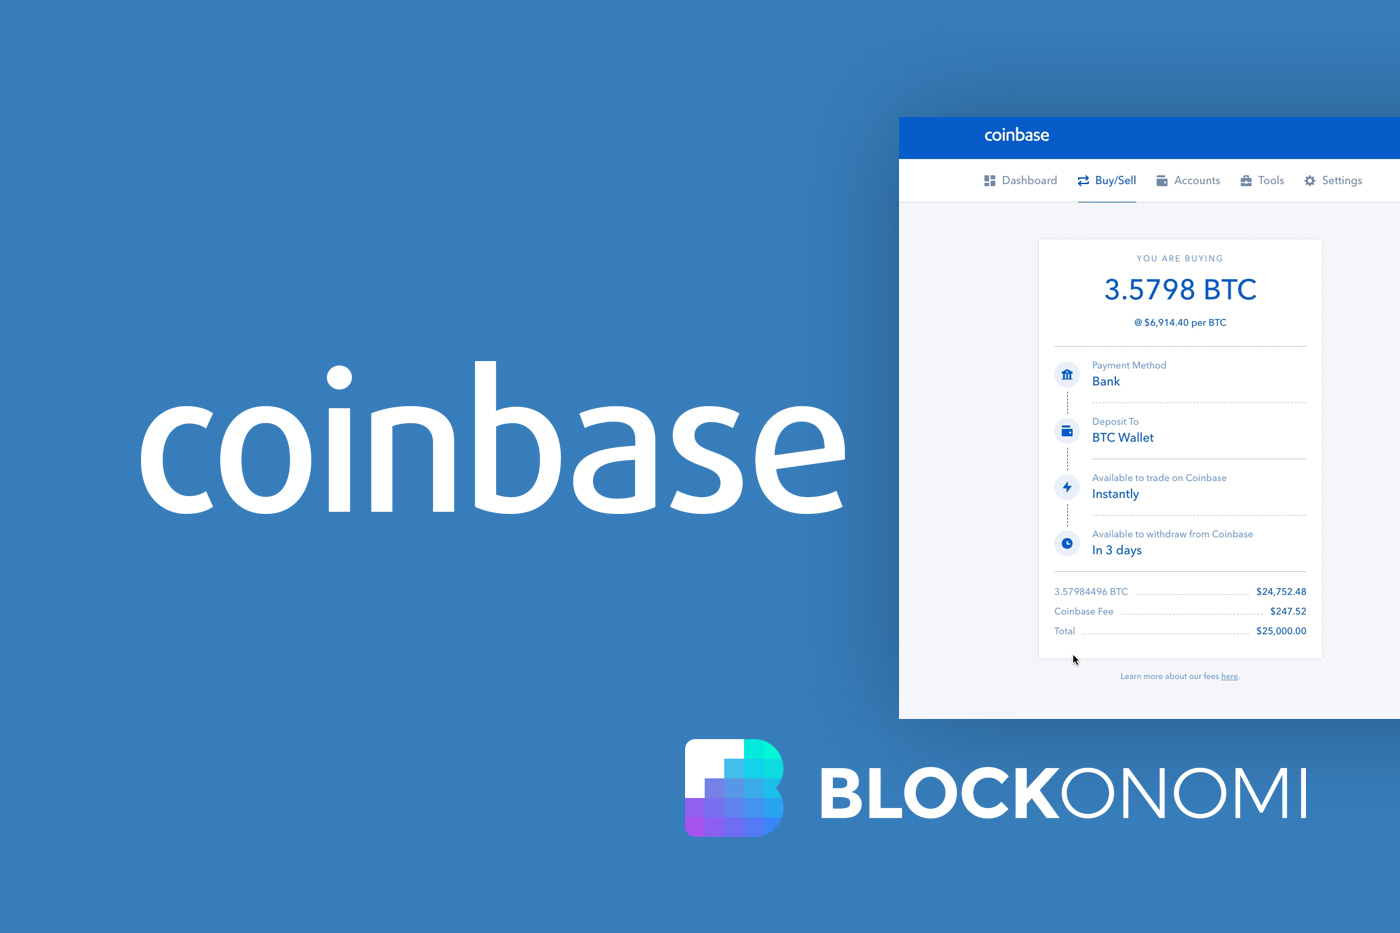 How to deposit money in coinbase pro